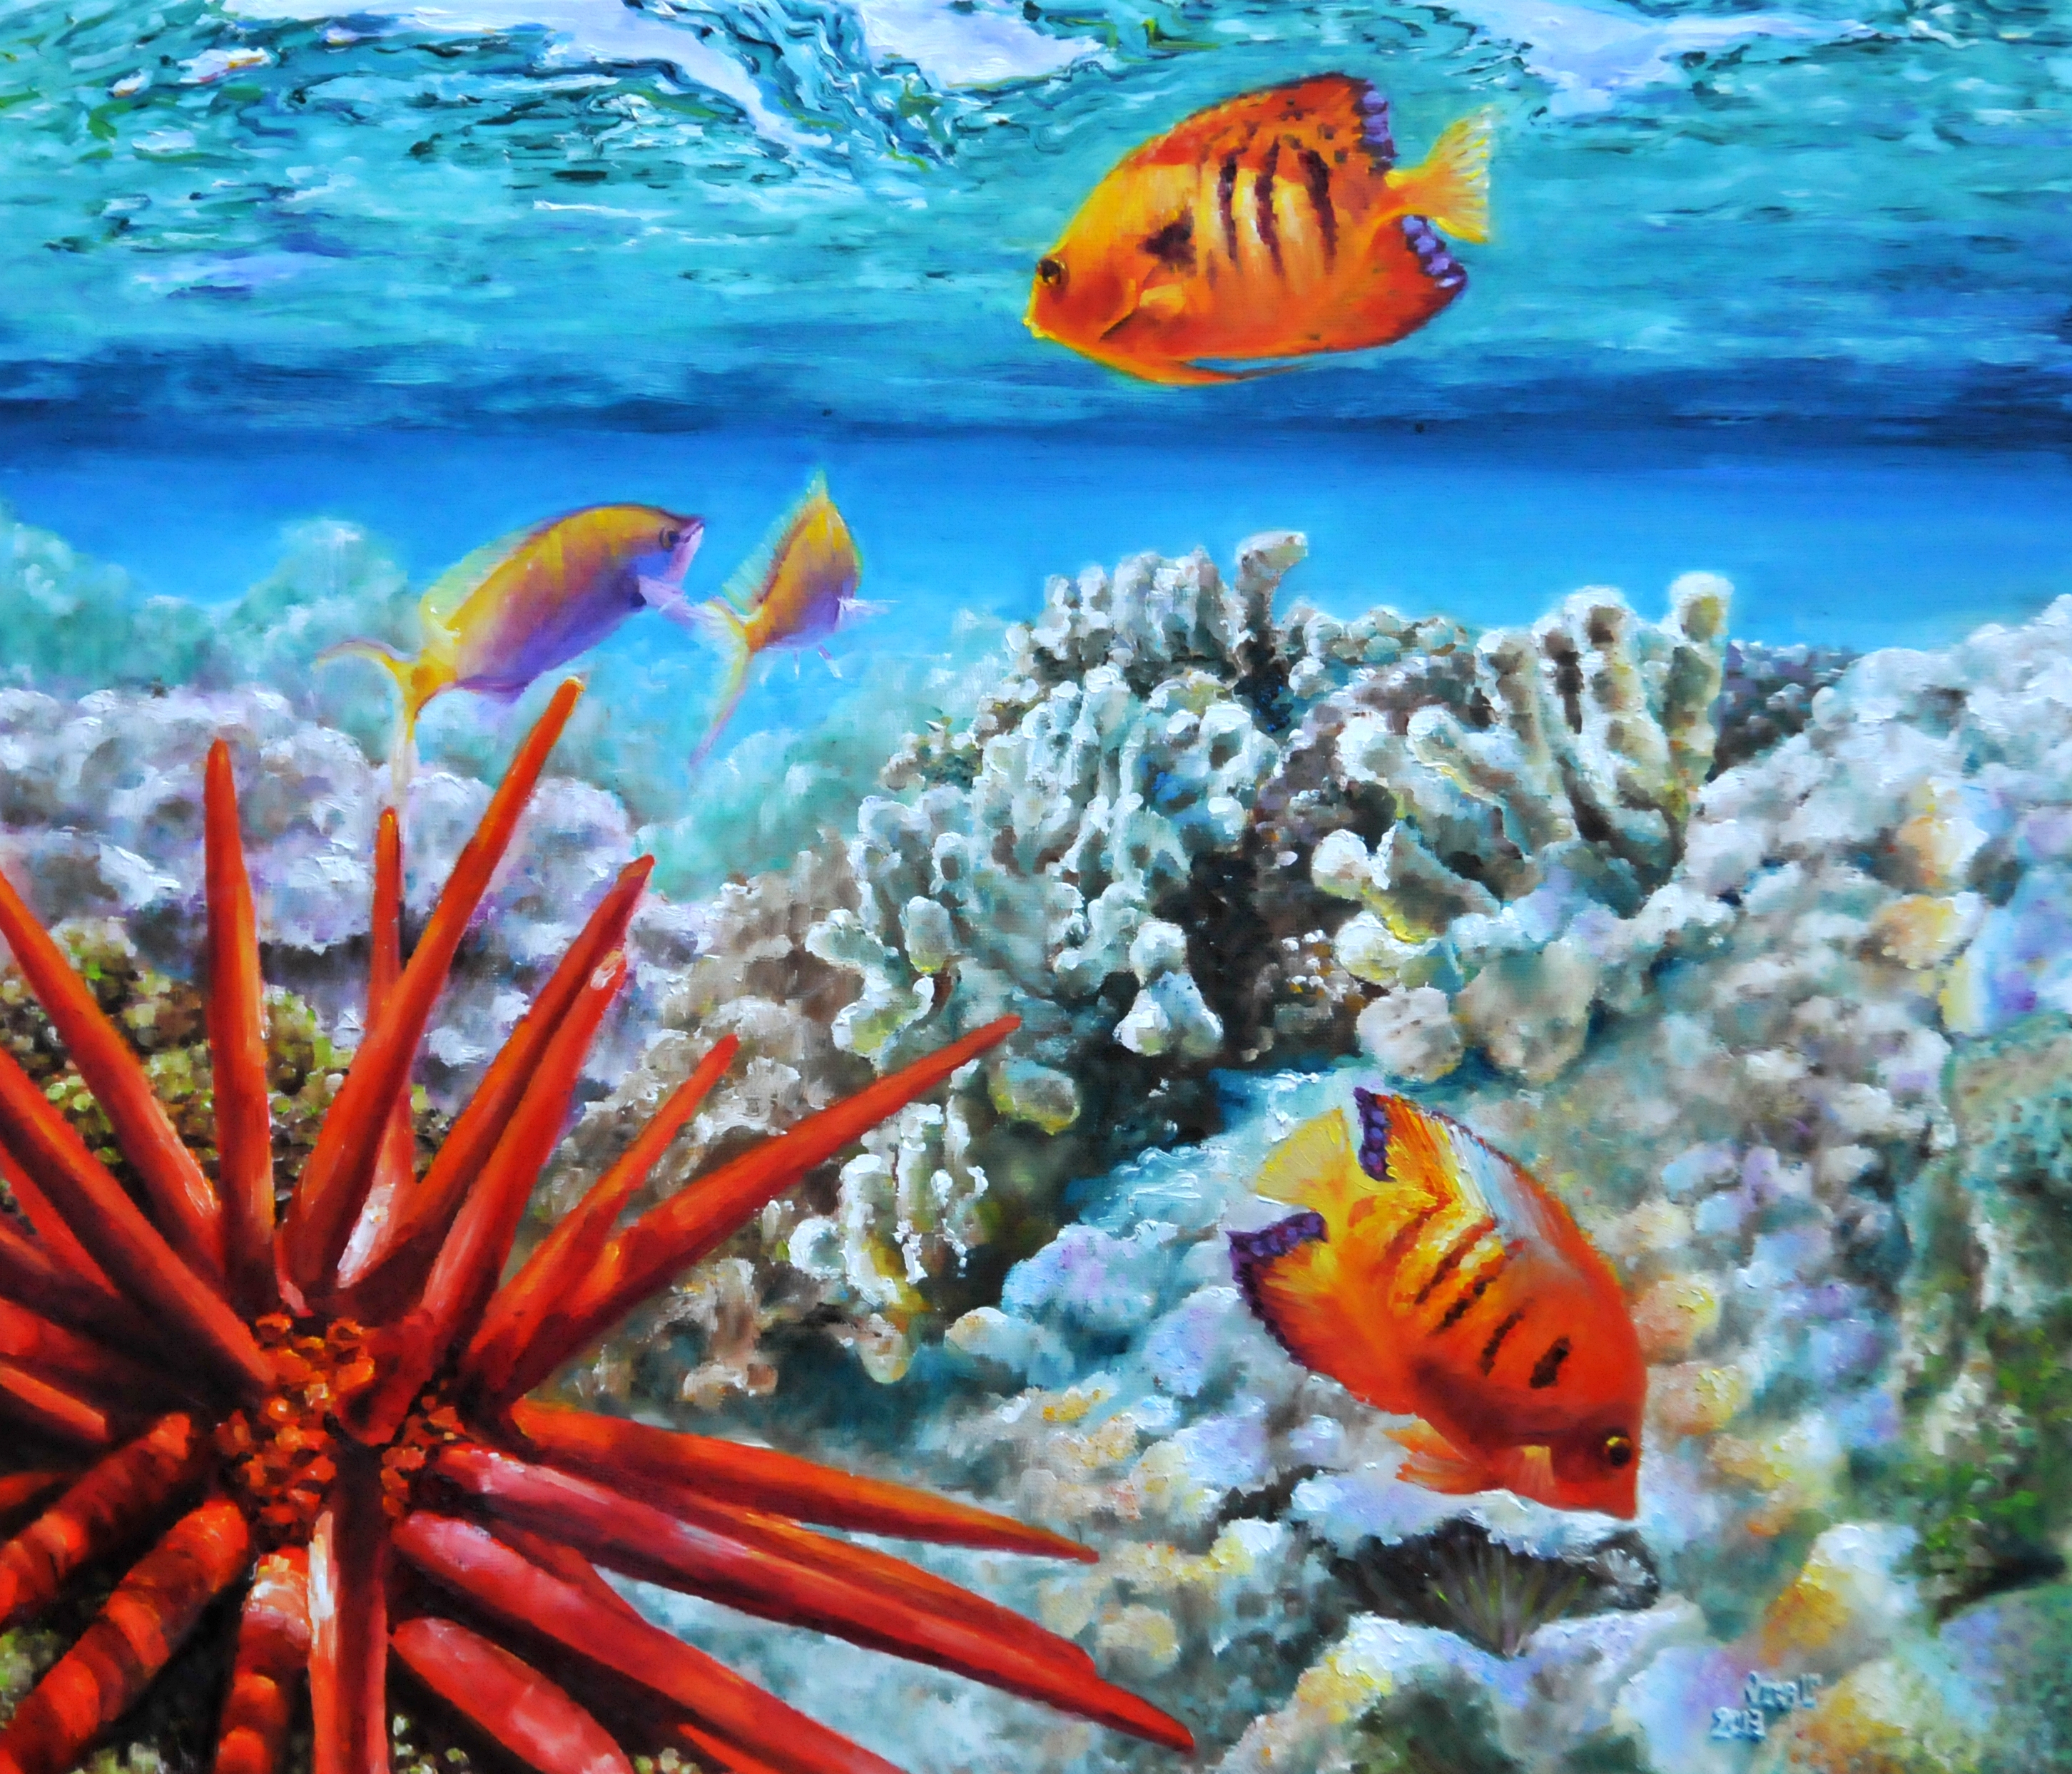 Flame angelfish | Oil paint on linen | Year: 2013 | Dimensions: 60X70cm